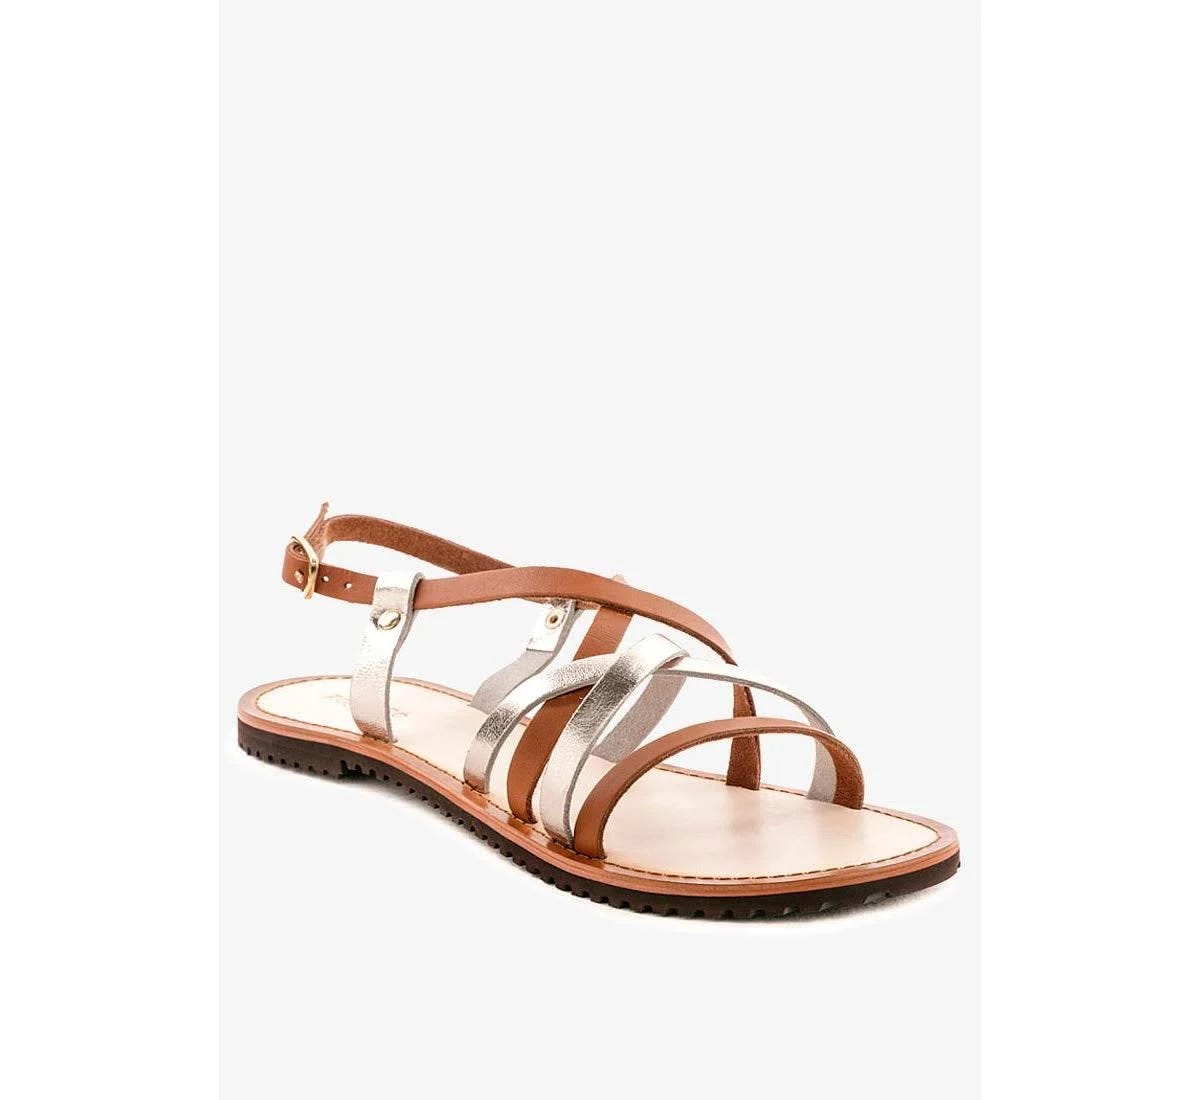 Brown Genuine Leather Flat Sandals with Adjustable Strap | Image